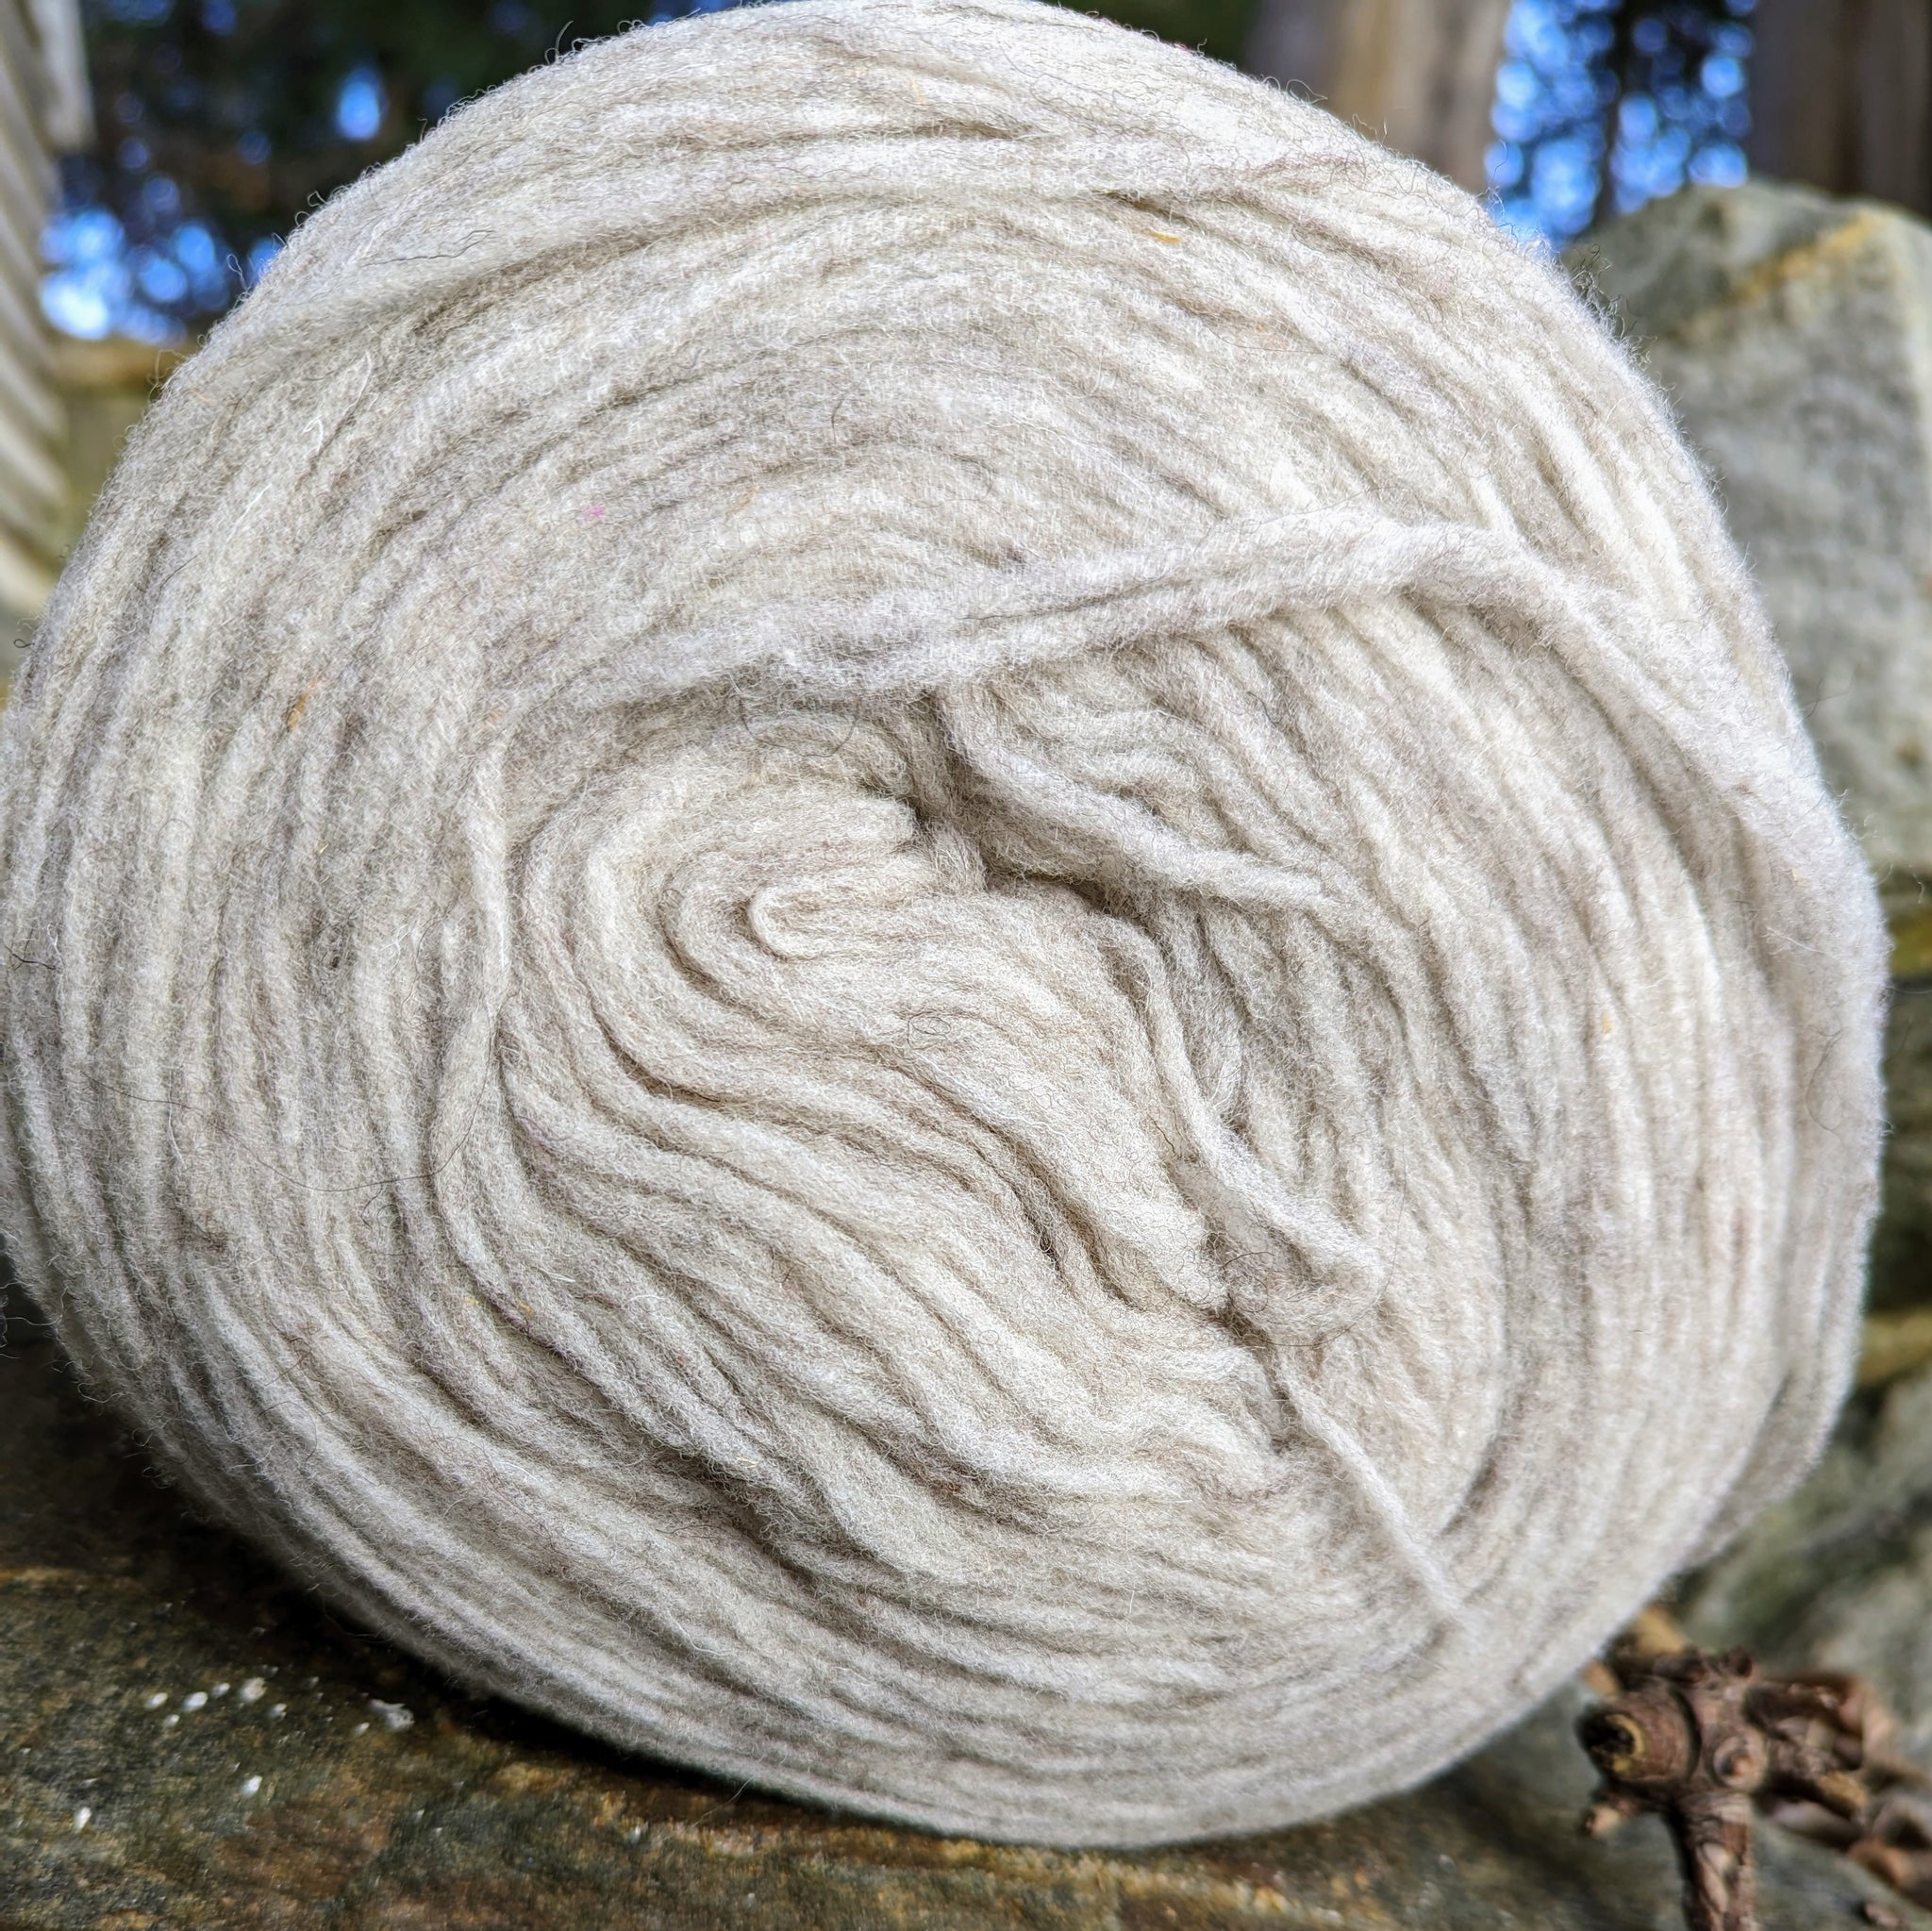 Manchelopis DK Yarn by WoolDreamers